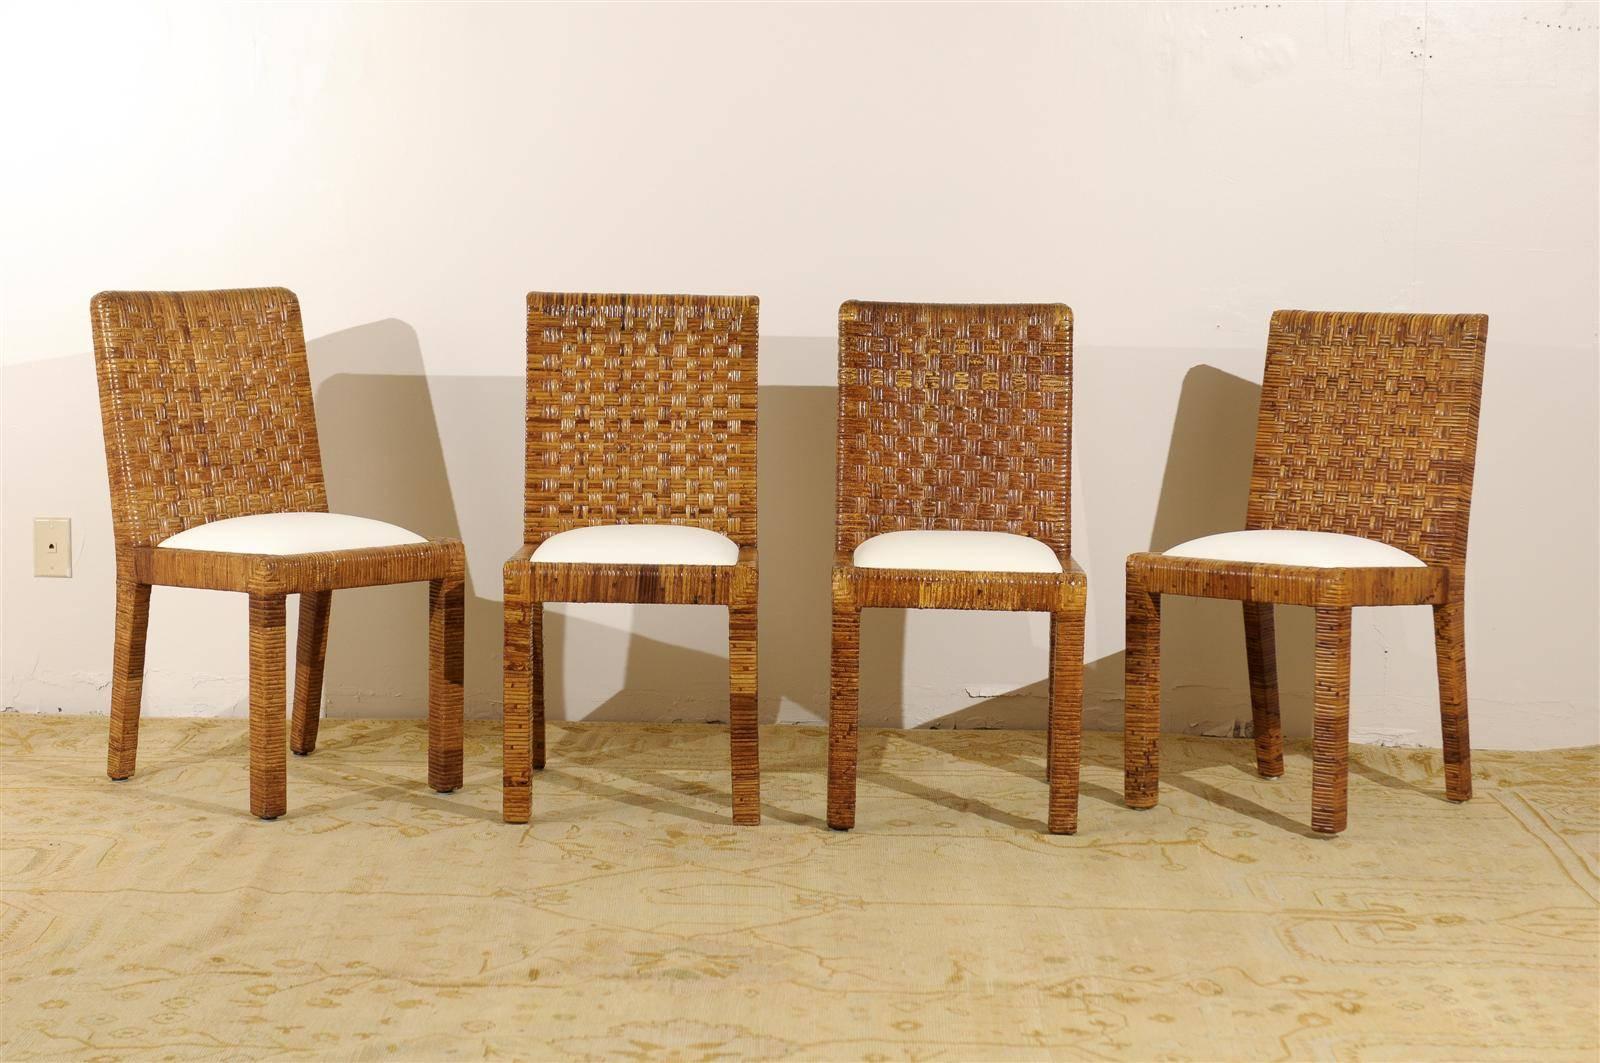 A stunning set of eight (8) Parsons style rattan dining chairs by Bielecky Brothers, circa 1970s. Stout hardwood frame construction completely wrapped in rattan. Fabulous quality and craftsmanship. The unmistakable look of Old Money ! There is